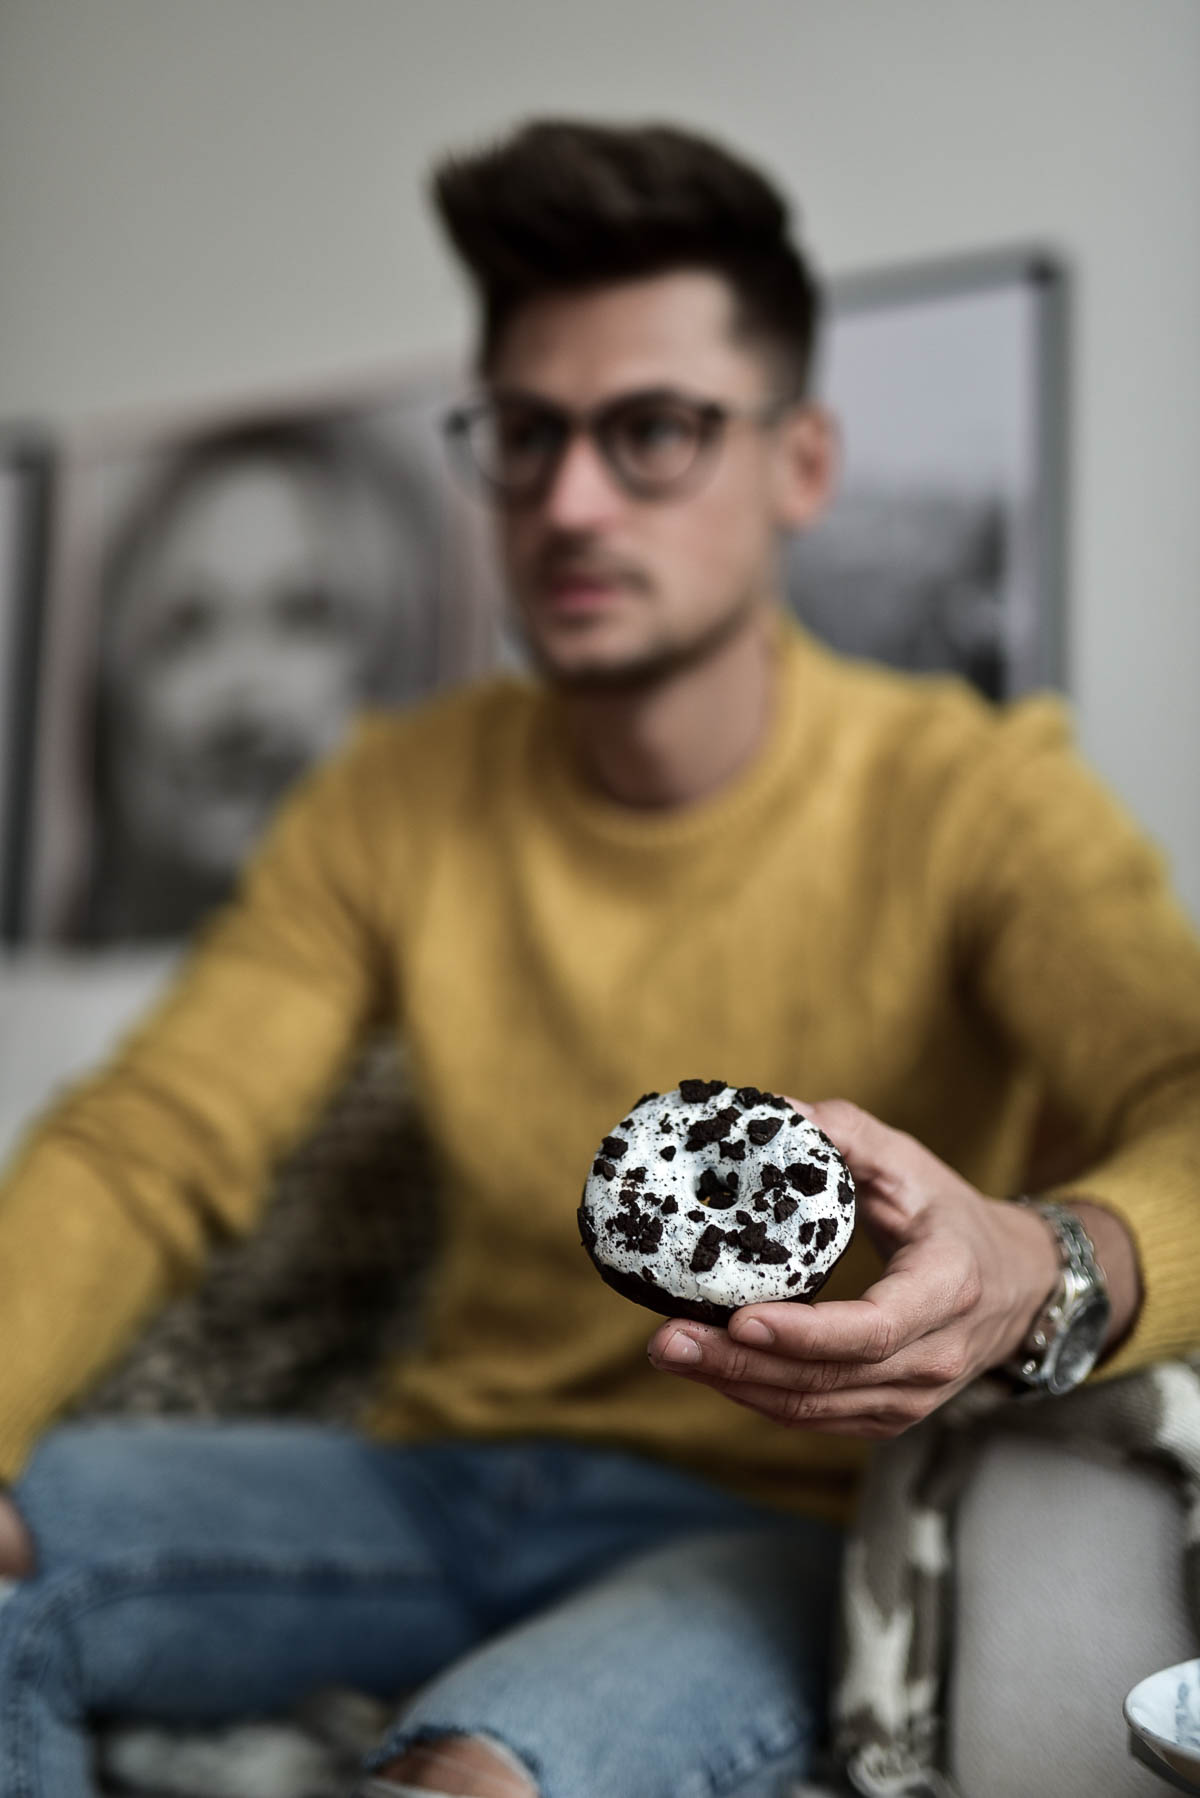 Tommeezjerry-Fashionblog-Lifestyleblog-Styleblog-Männerblog-Männer-Modeblog-Berlin-Berlinblog-Männermodeblog-Outfit-Sweater-Yellow-Ripped-Jeans-Oreo-Donut